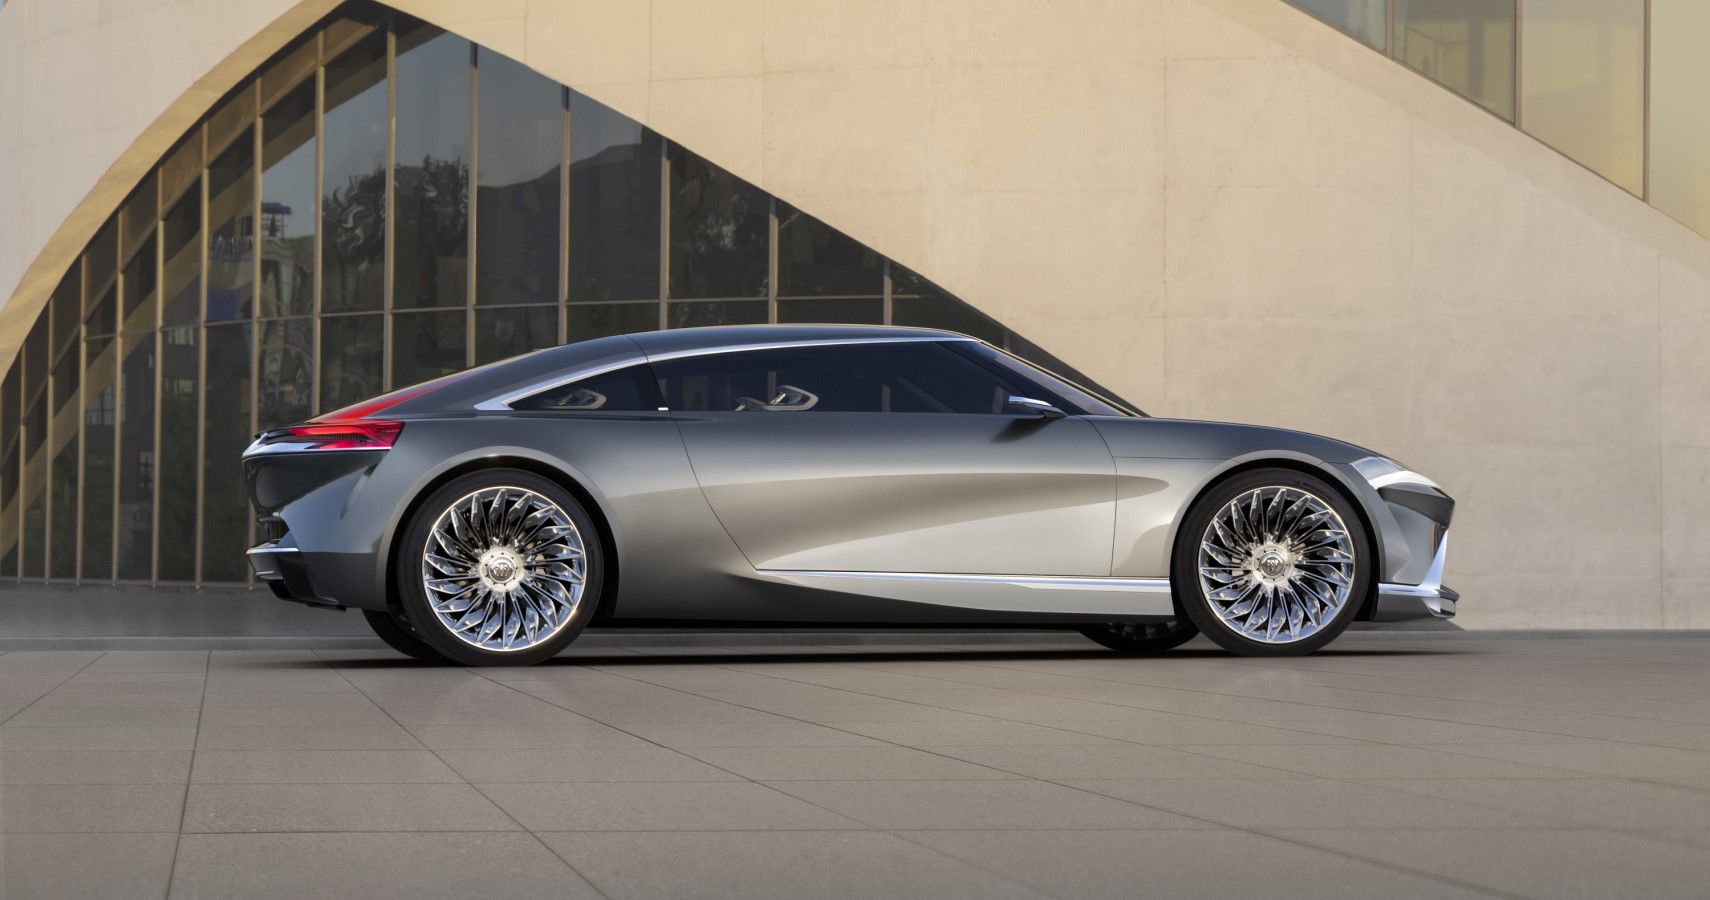 Buick Wildcat EV Concept Gives Us A Peek At The Brand's Electrifying Future